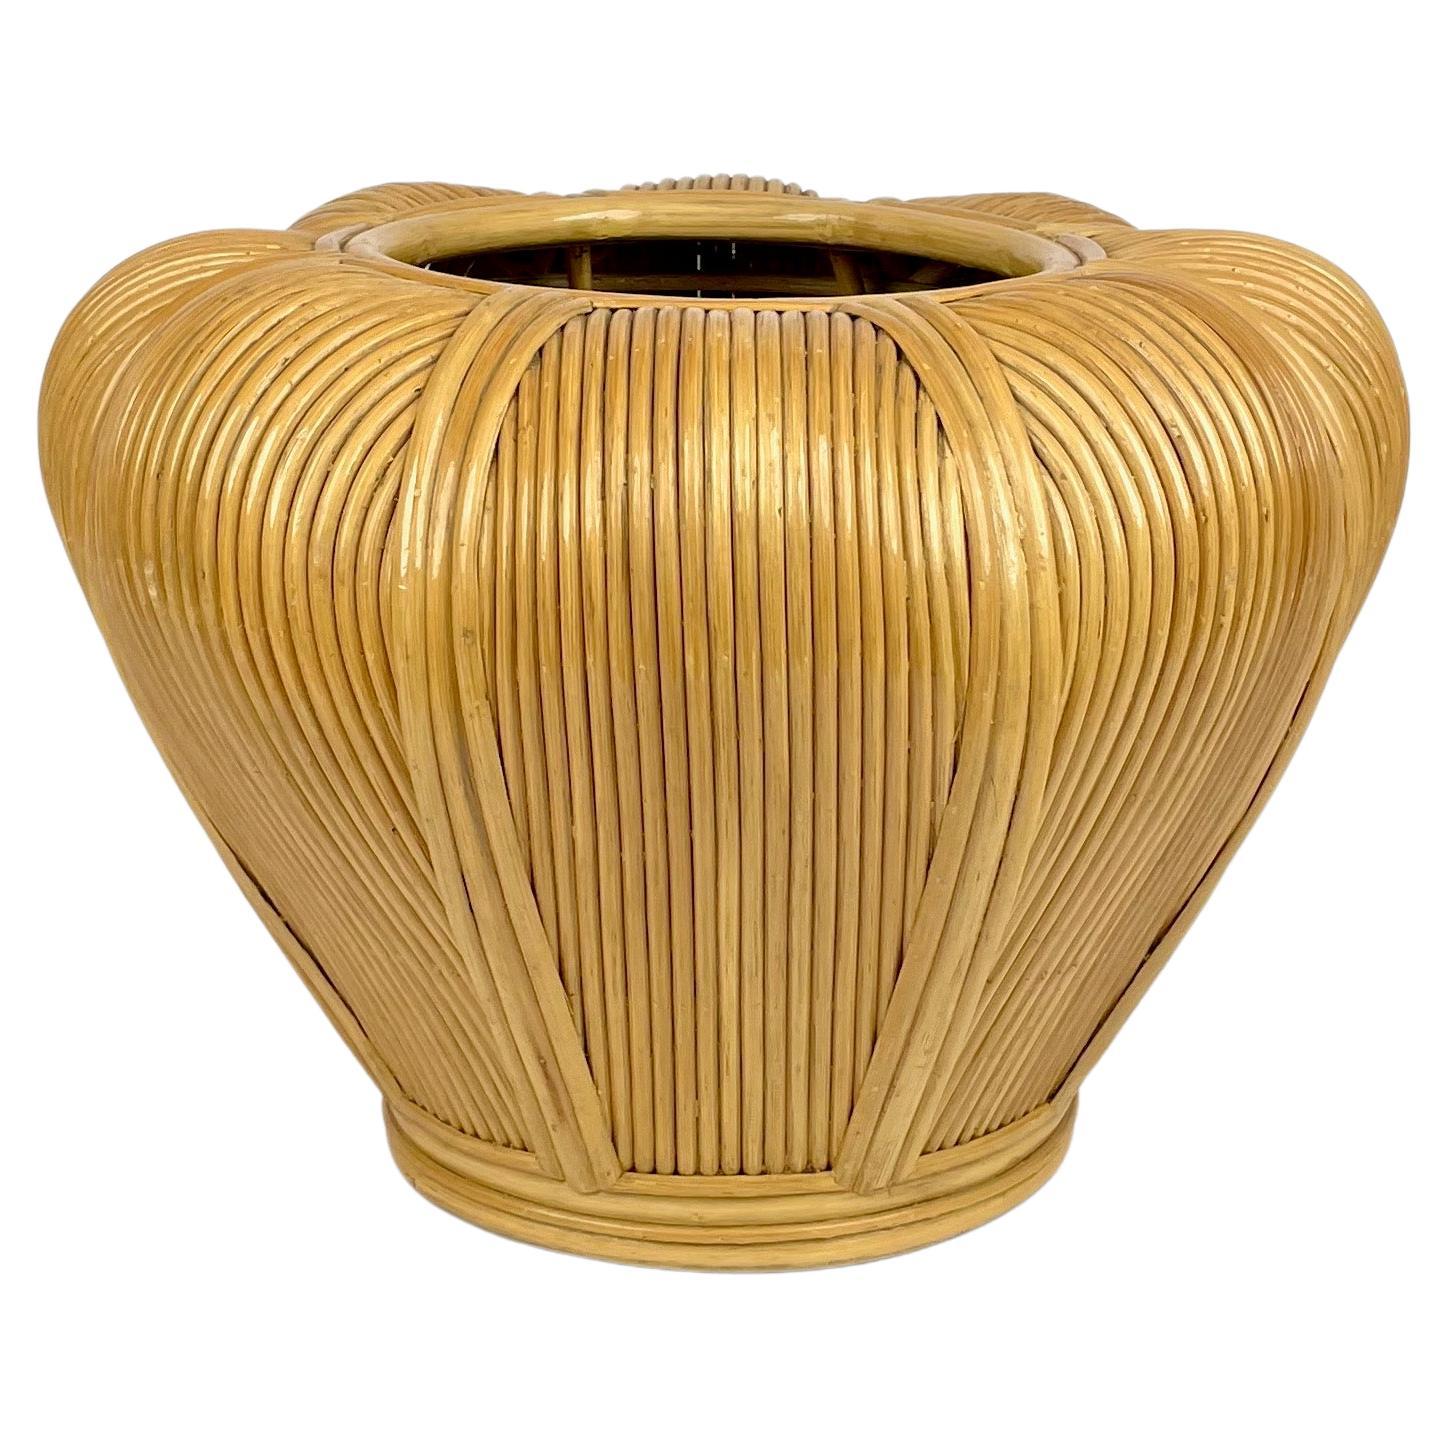 Rattan vase cachepot plant holder in the shape of a flower 

Made in Italy in the 1970s.

An astonishing piece that will enrich a midcentury-style living room or studio.
   